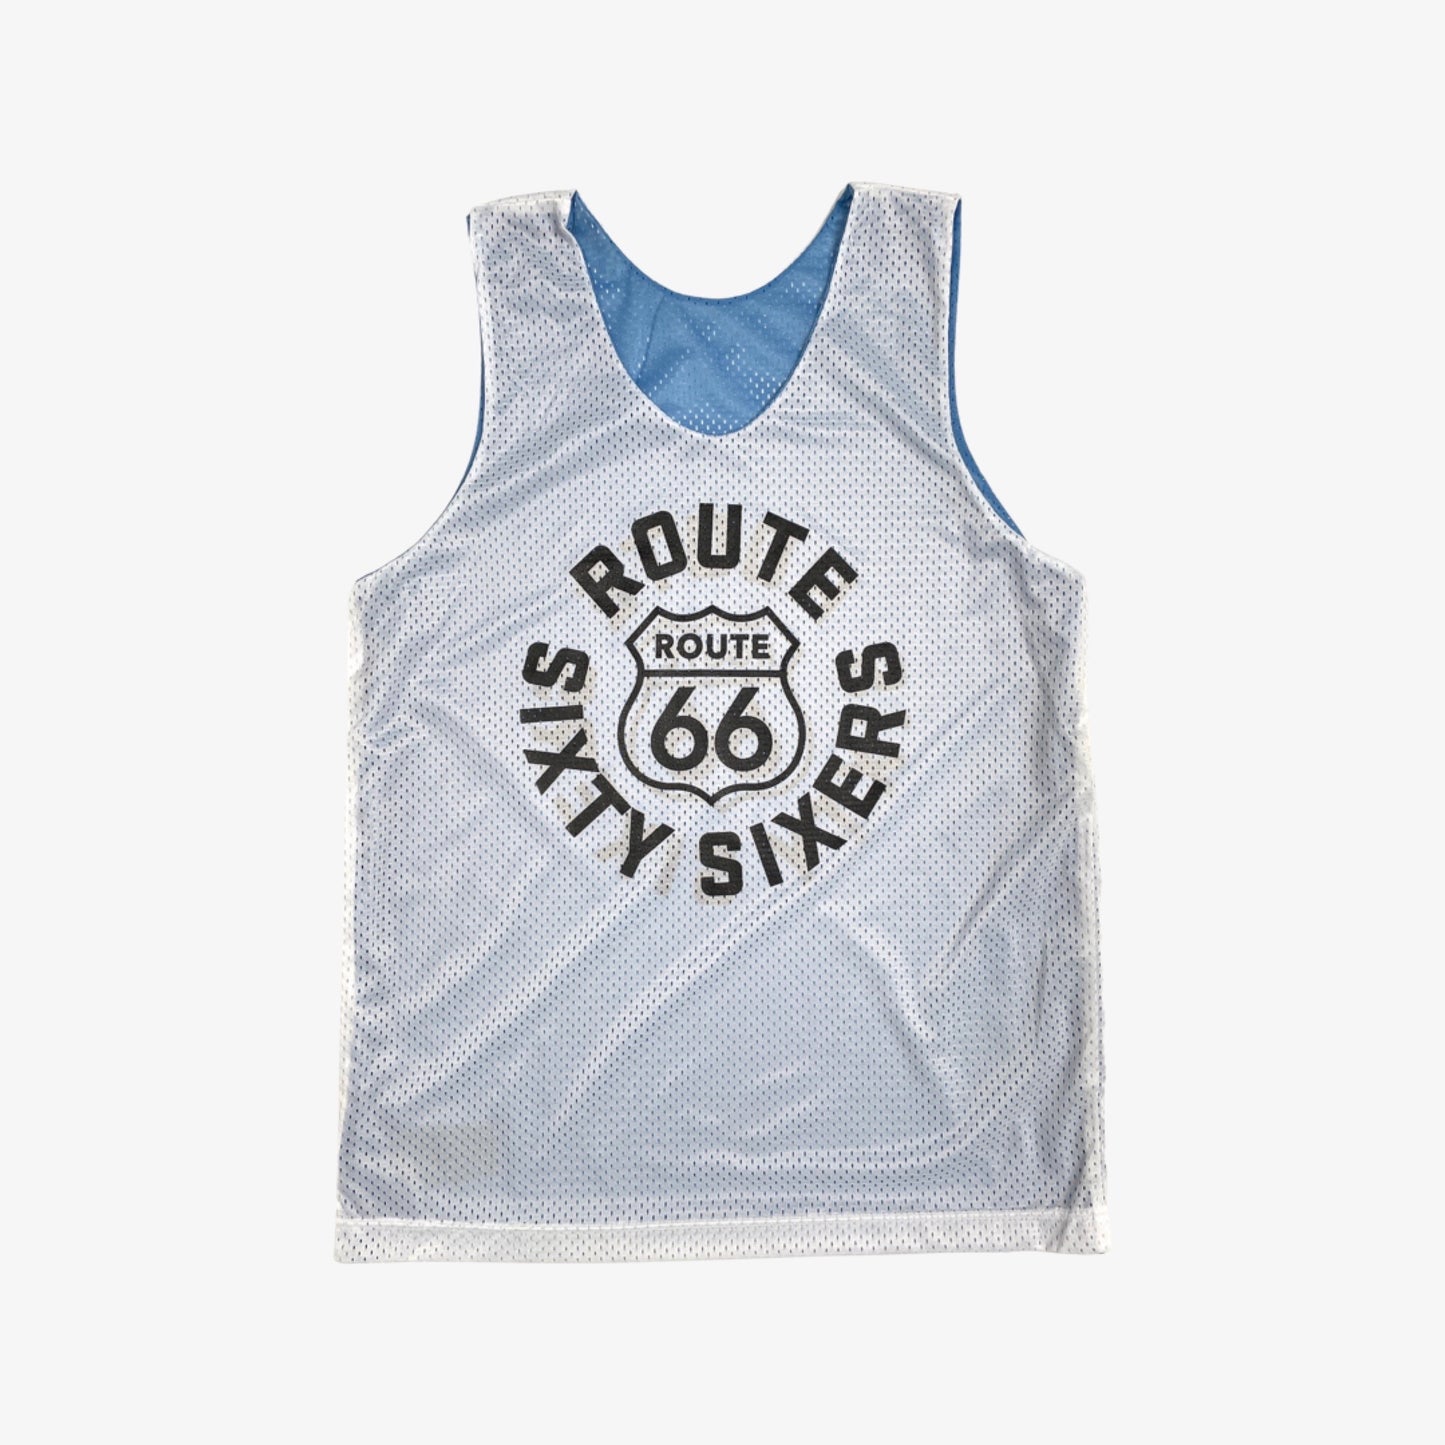 Route 66ers Reversible Practice Jersey